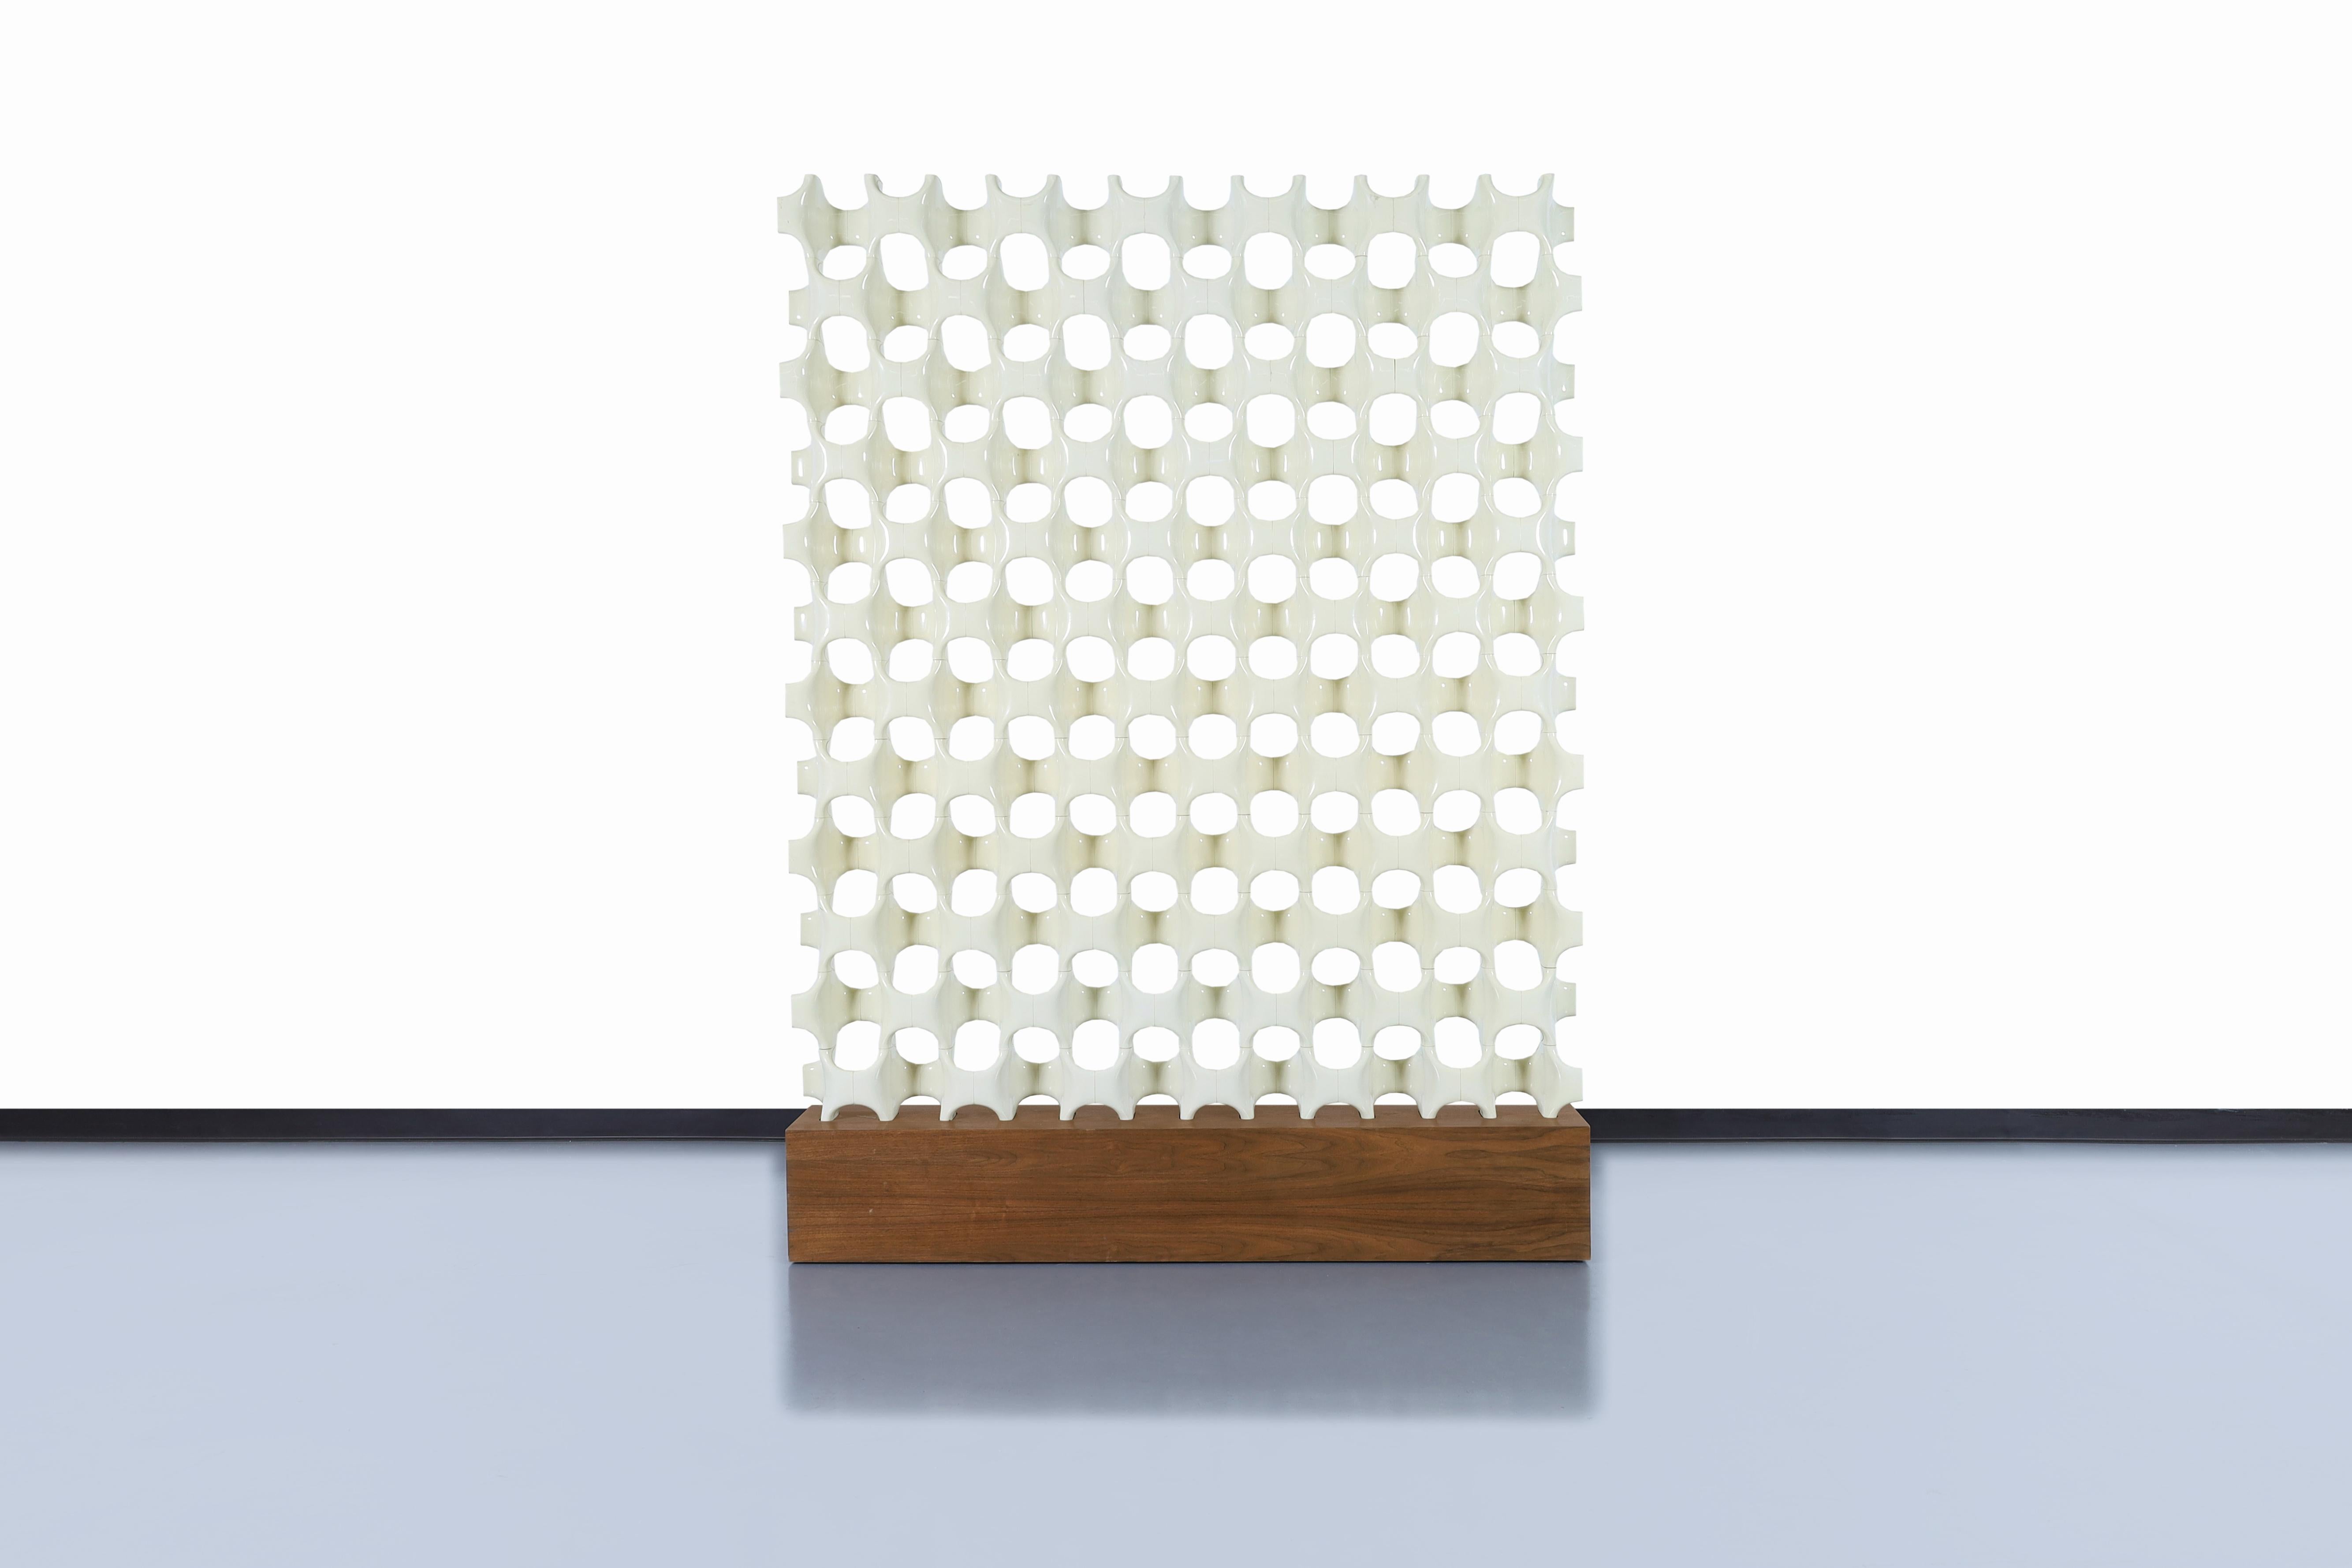 Stunning architectural “Sculpta-Grille” freestanding room divider by Richard Harvey for Harvey Design Workshop, Inc. in the United States, circa 1960s. Richard Harvey's vast knowledge of plastics resin and his concern to create something beyond a